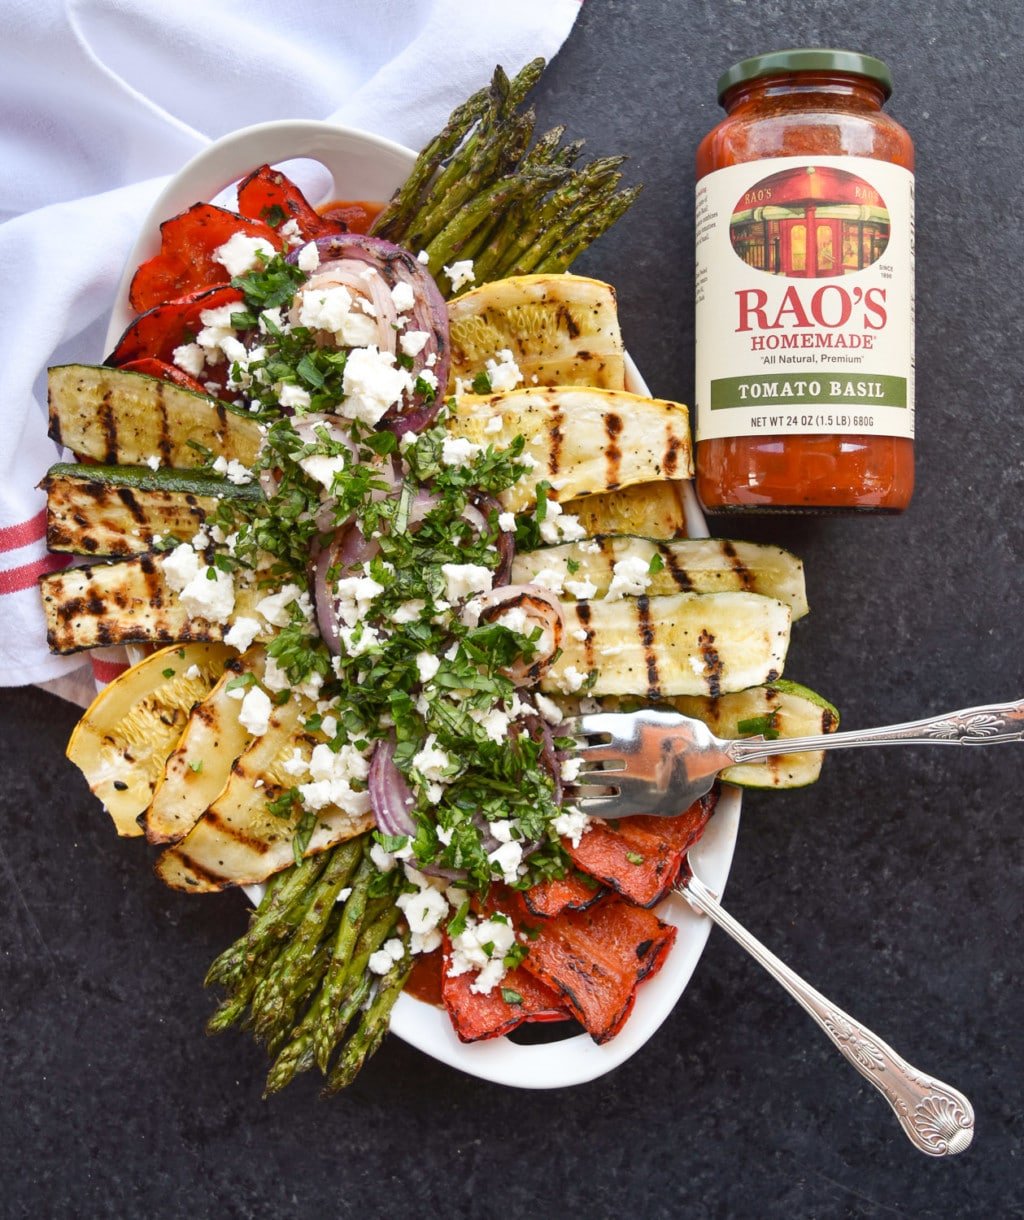 Platter of colorful grilled vegetables with serving utensils next to a full jar of Rao's Tomato Basil Sauce.